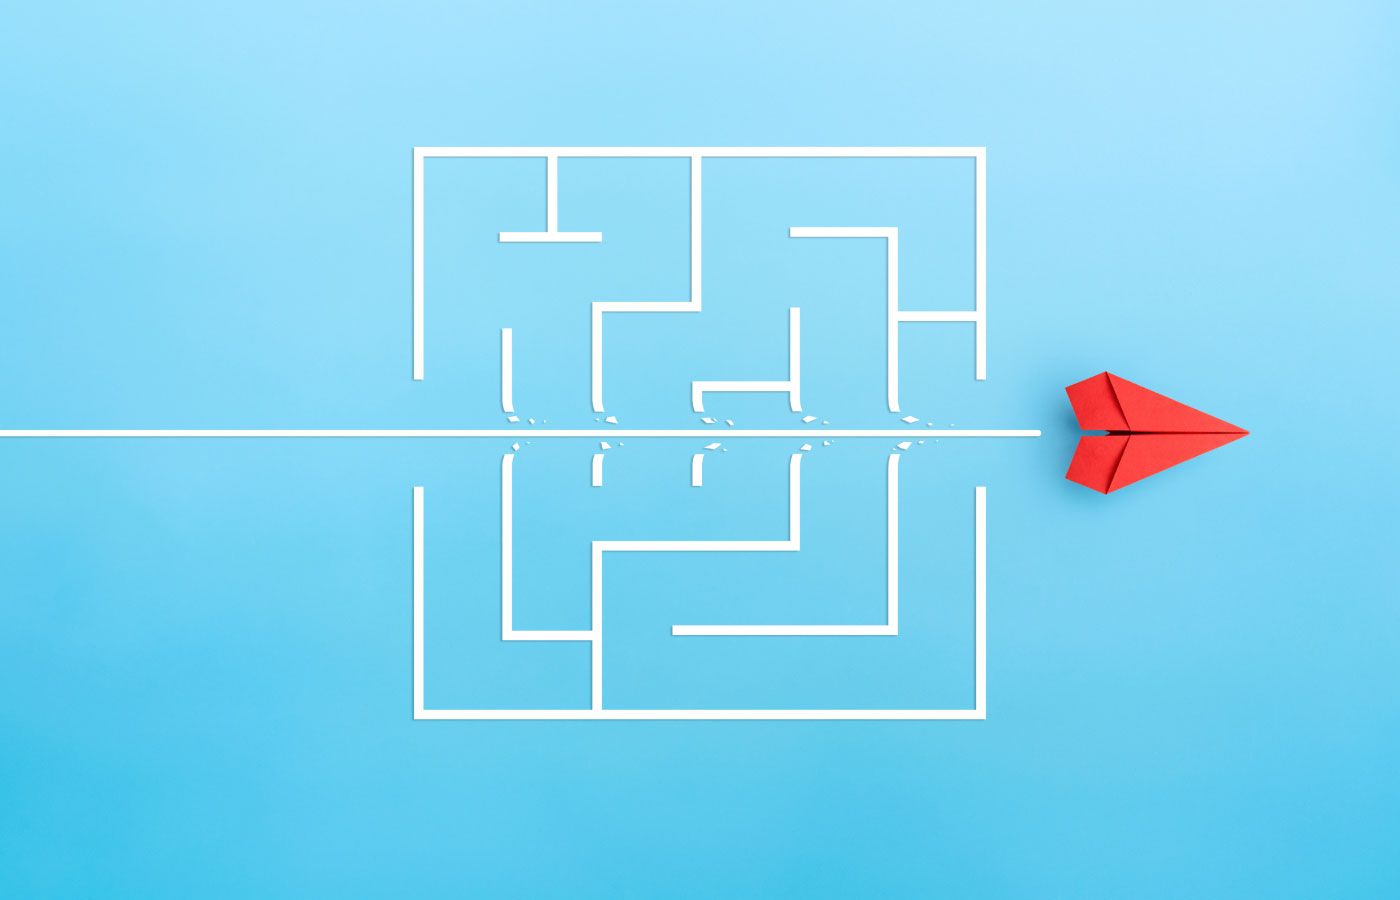 A red paper plan cutting through a white maze on a light blue background